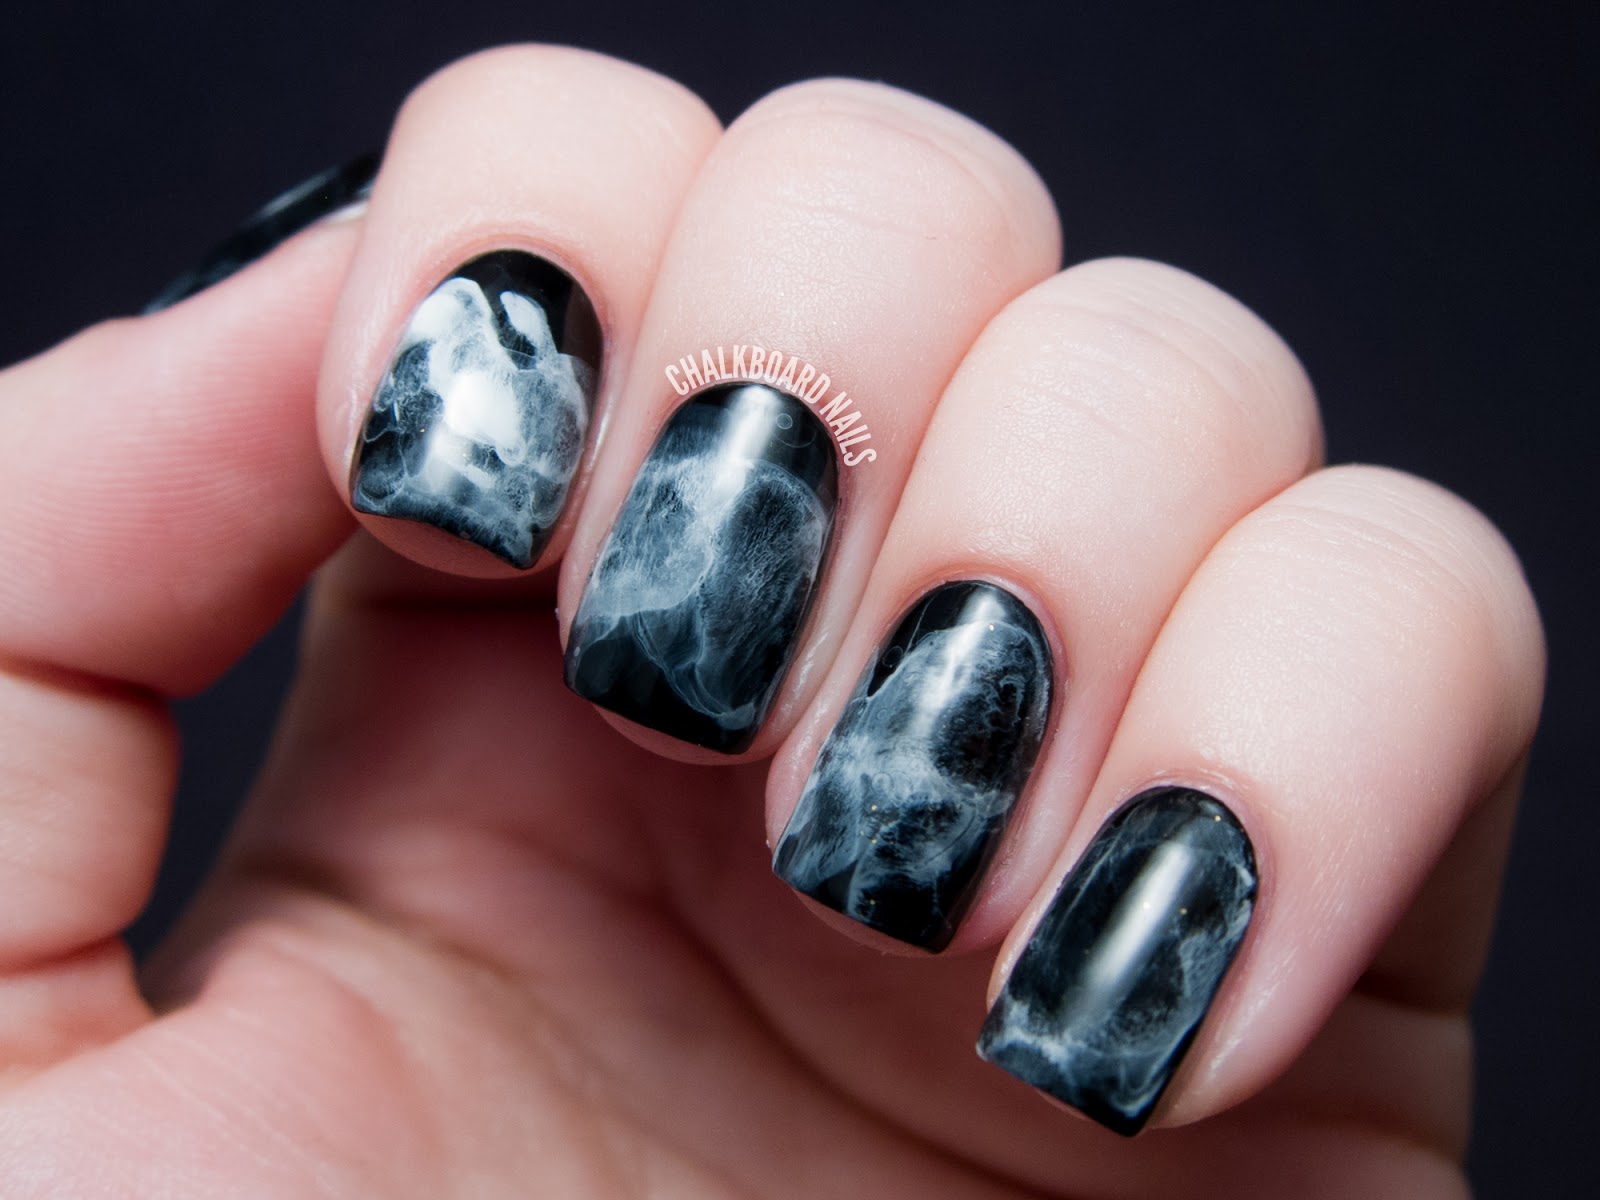 Stunning Black and White Nail Designs on Tumblr - wide 10